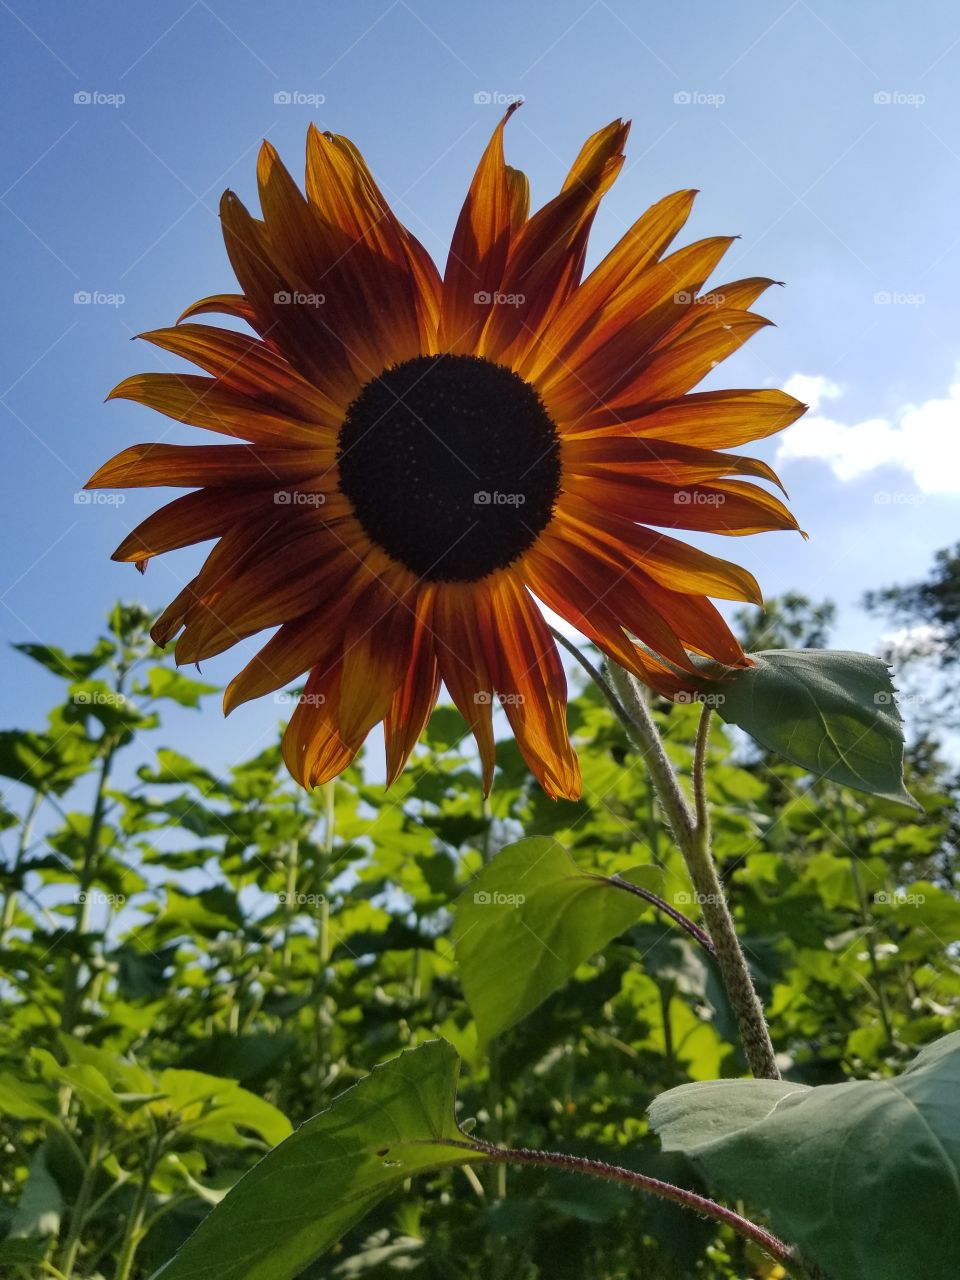 gorgeous sunflower in the summertime